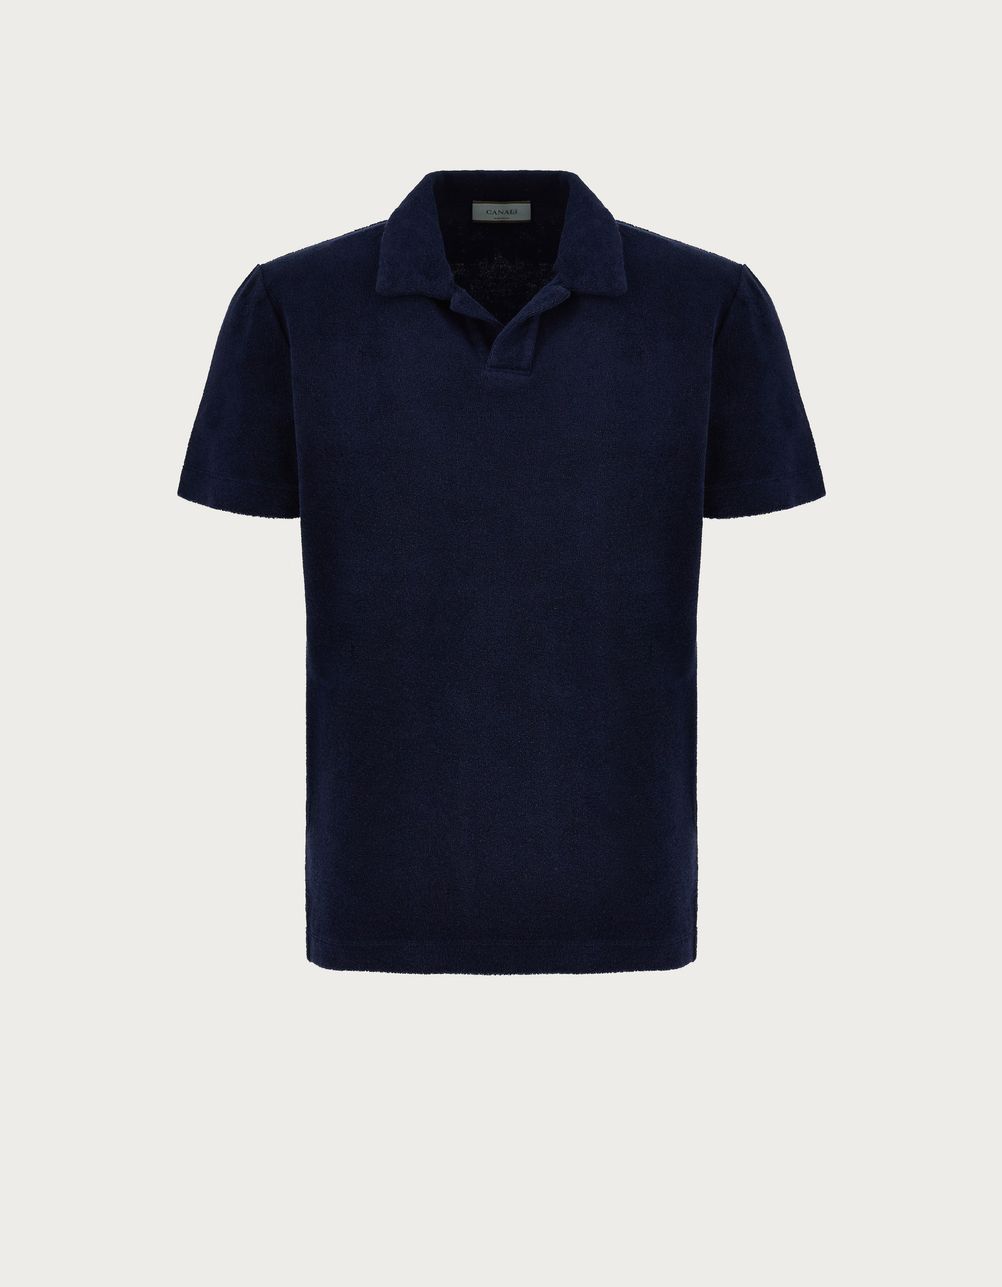 Navy blue polo shirt in garment-dyed cotton terry